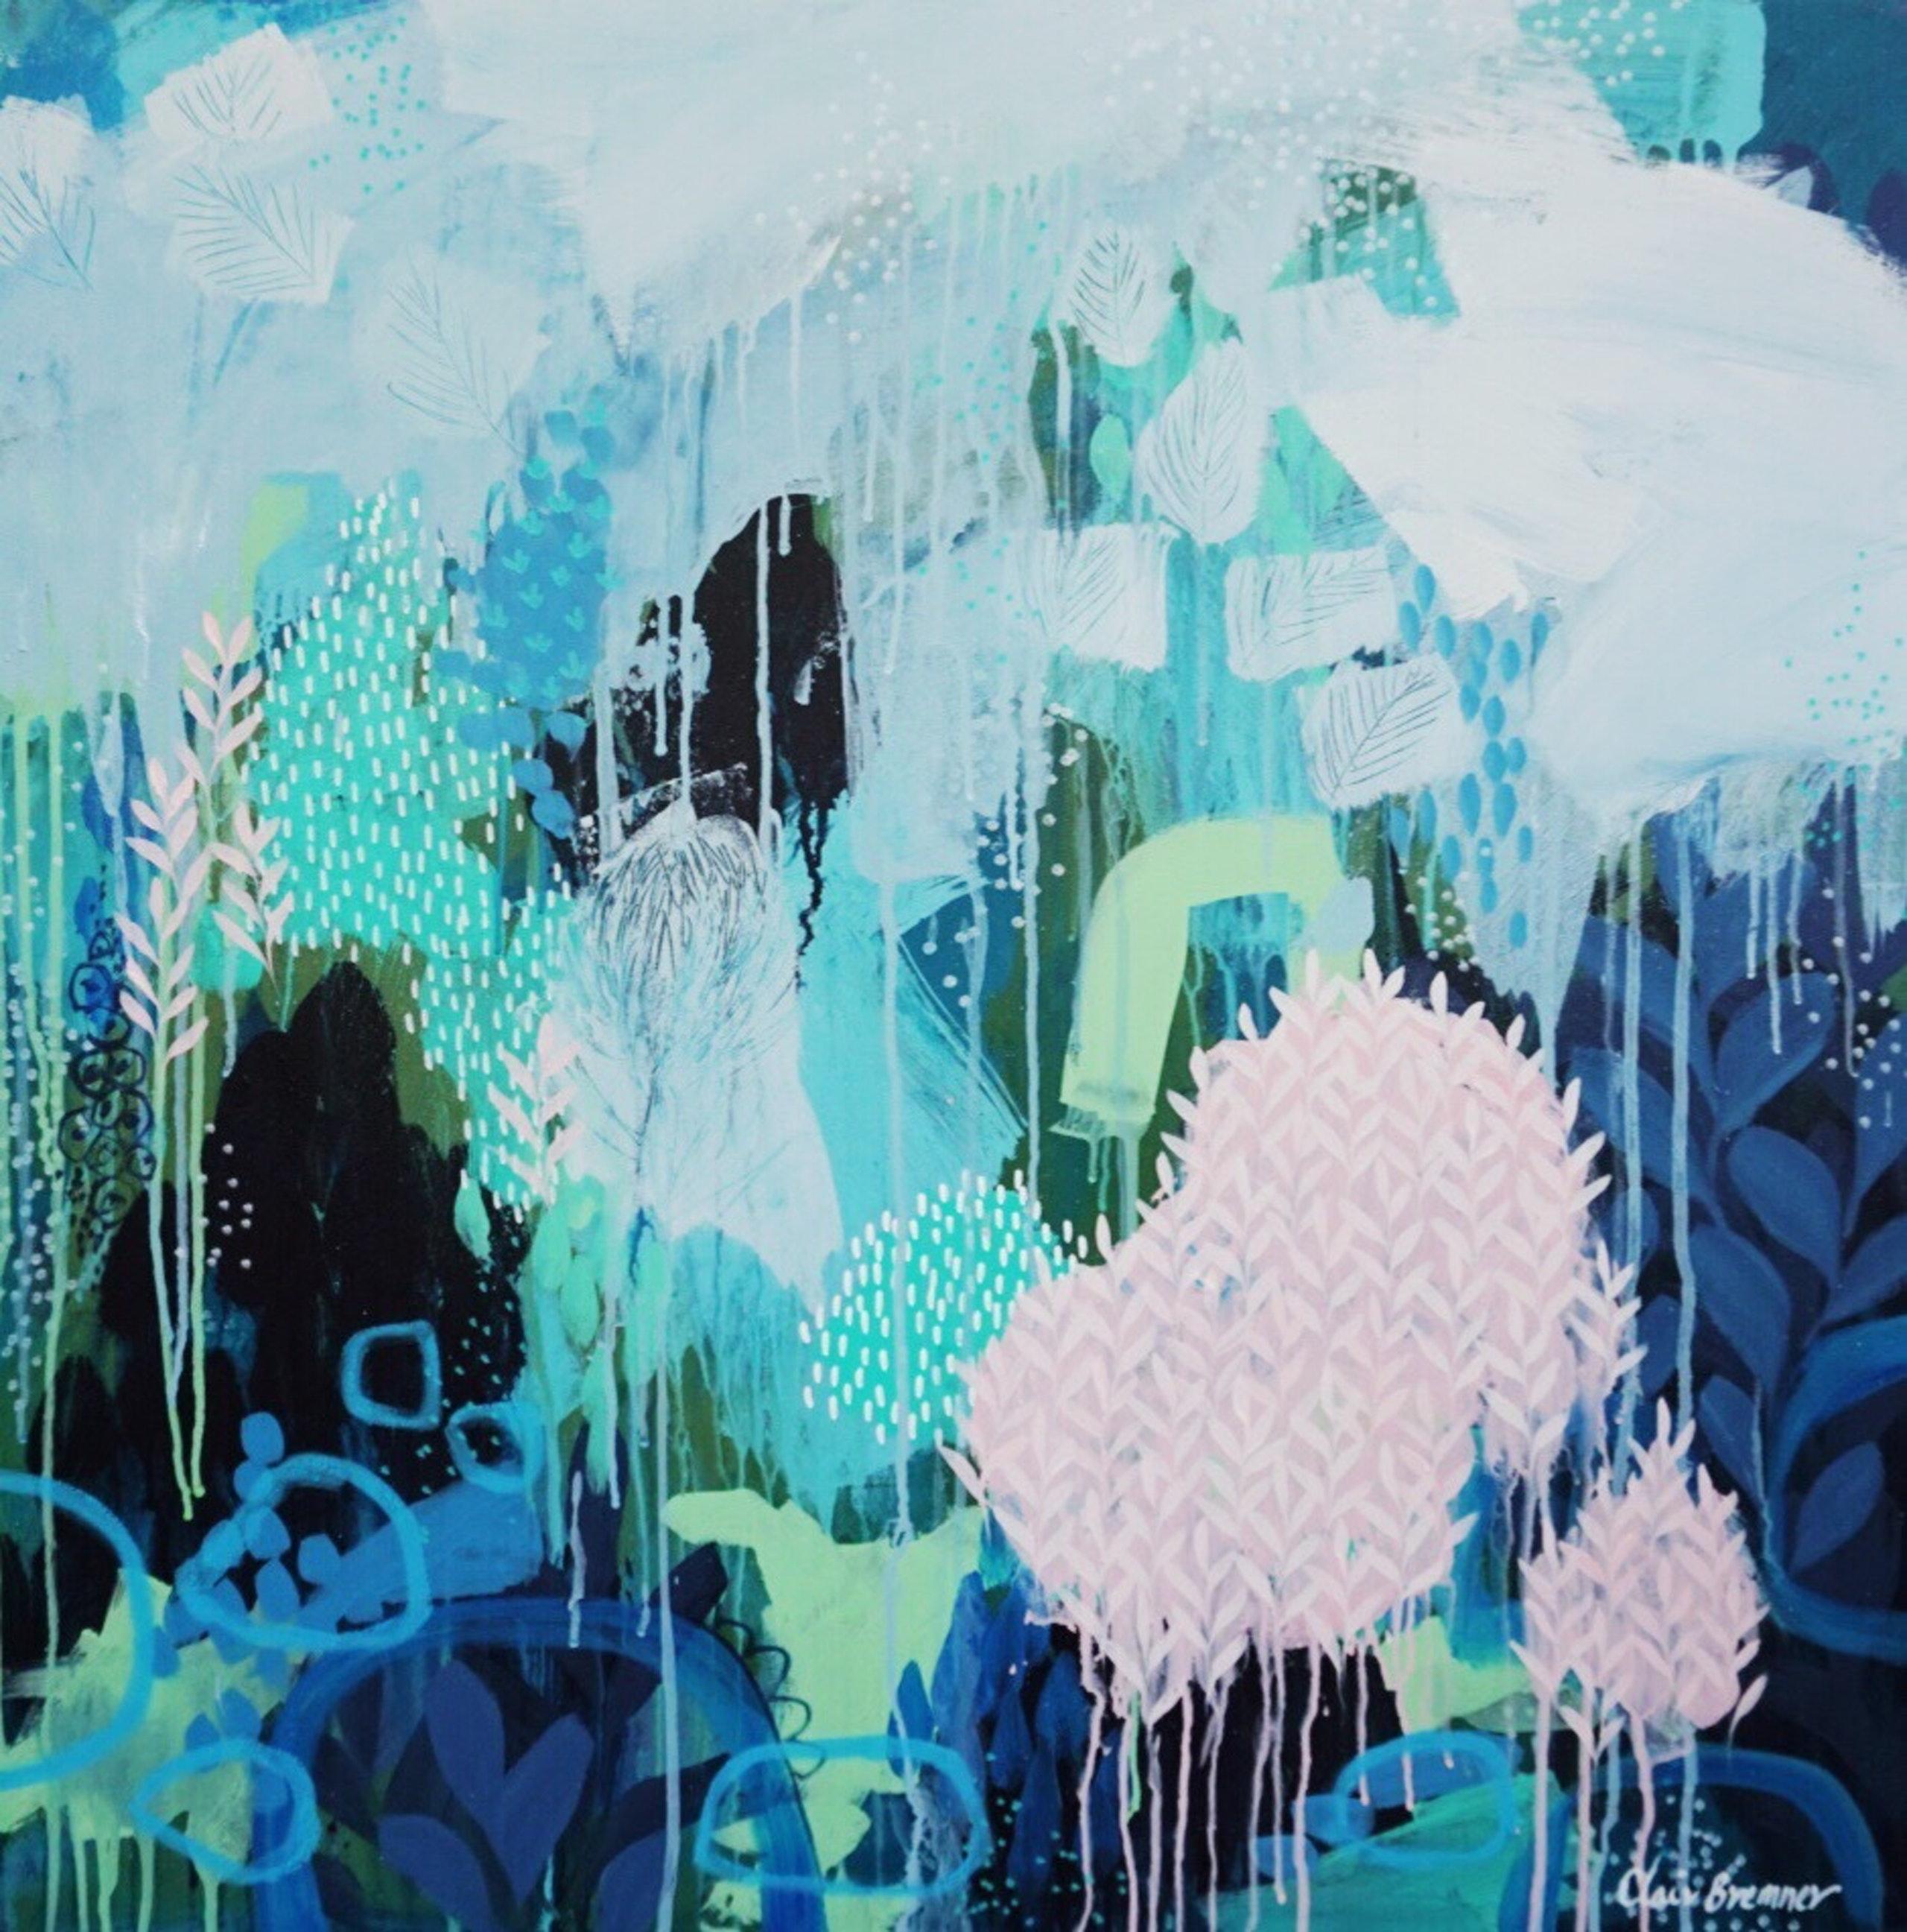 Acrylic on stretched canvas

Dreaming While Awake is an abstract expressionist painting inspired by nature and the Australian bush surrounding my home. A calming combination of blue, green and soft pink abstract forms with details of foliage and